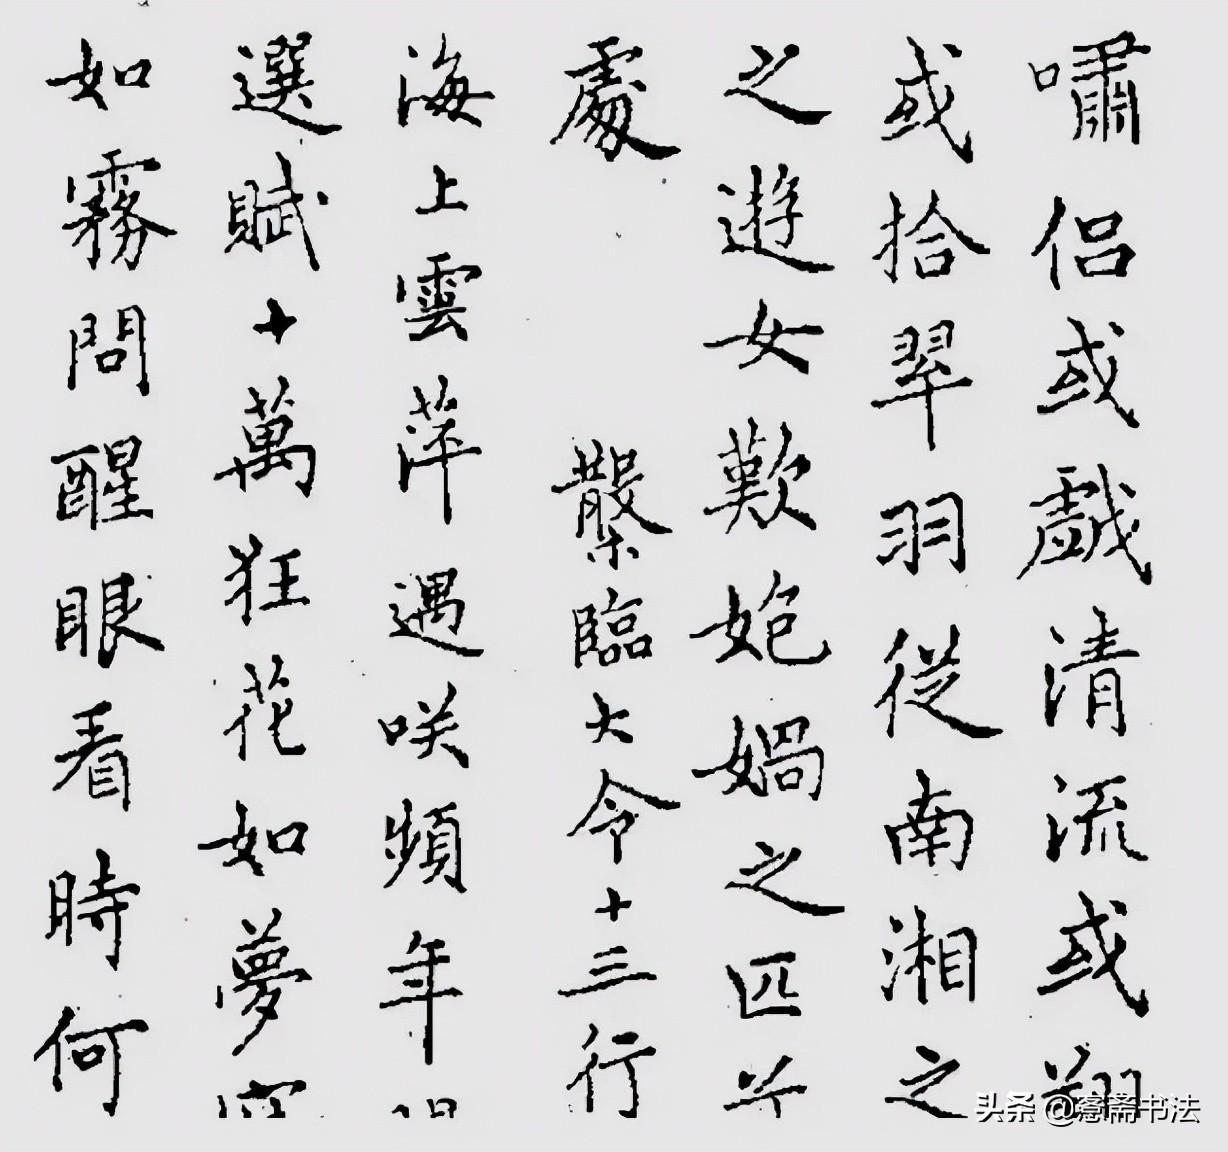 The pen writing of 24 calligraphers in "Xunzhai Calligraphy" is really good